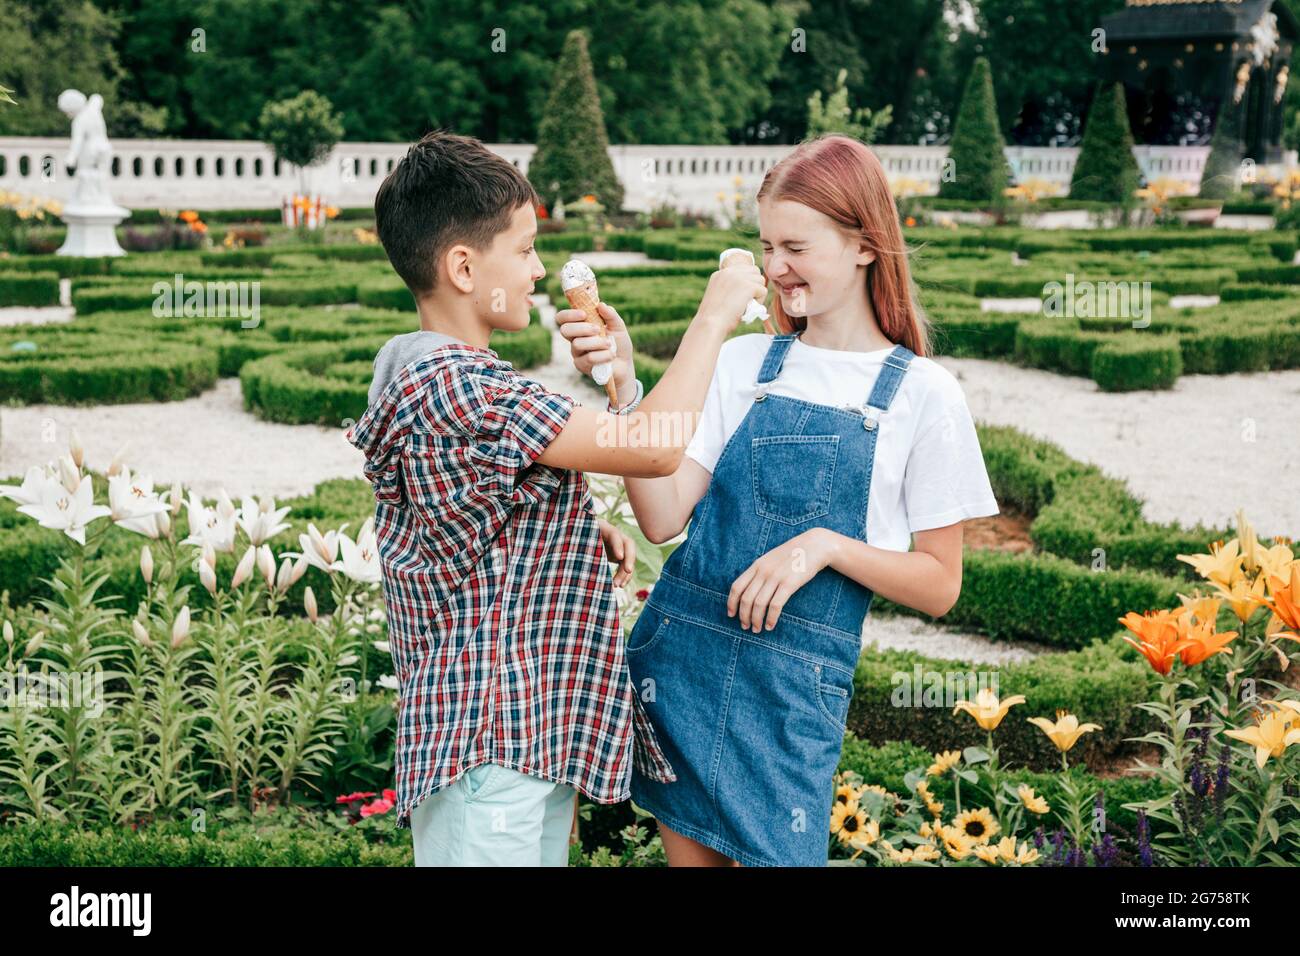 children teenagers boy and girl are having fun on summer day against background of greenery, eating ice cream Stock Photo